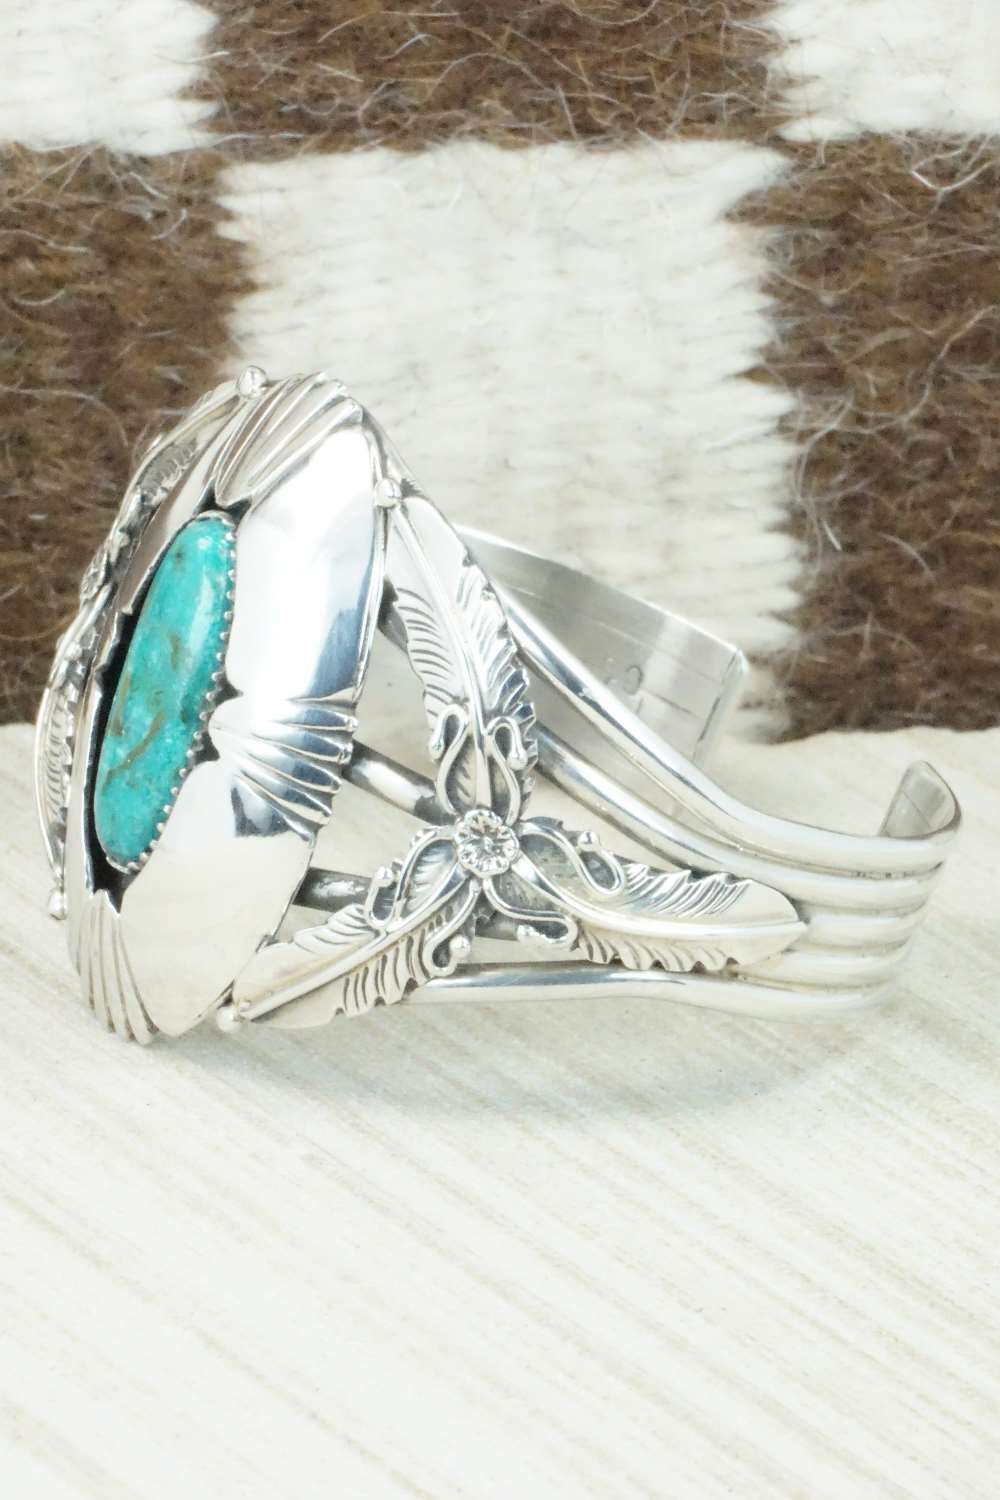 Turquoise & Sterling Silver Bracelet - Cecil Saunders